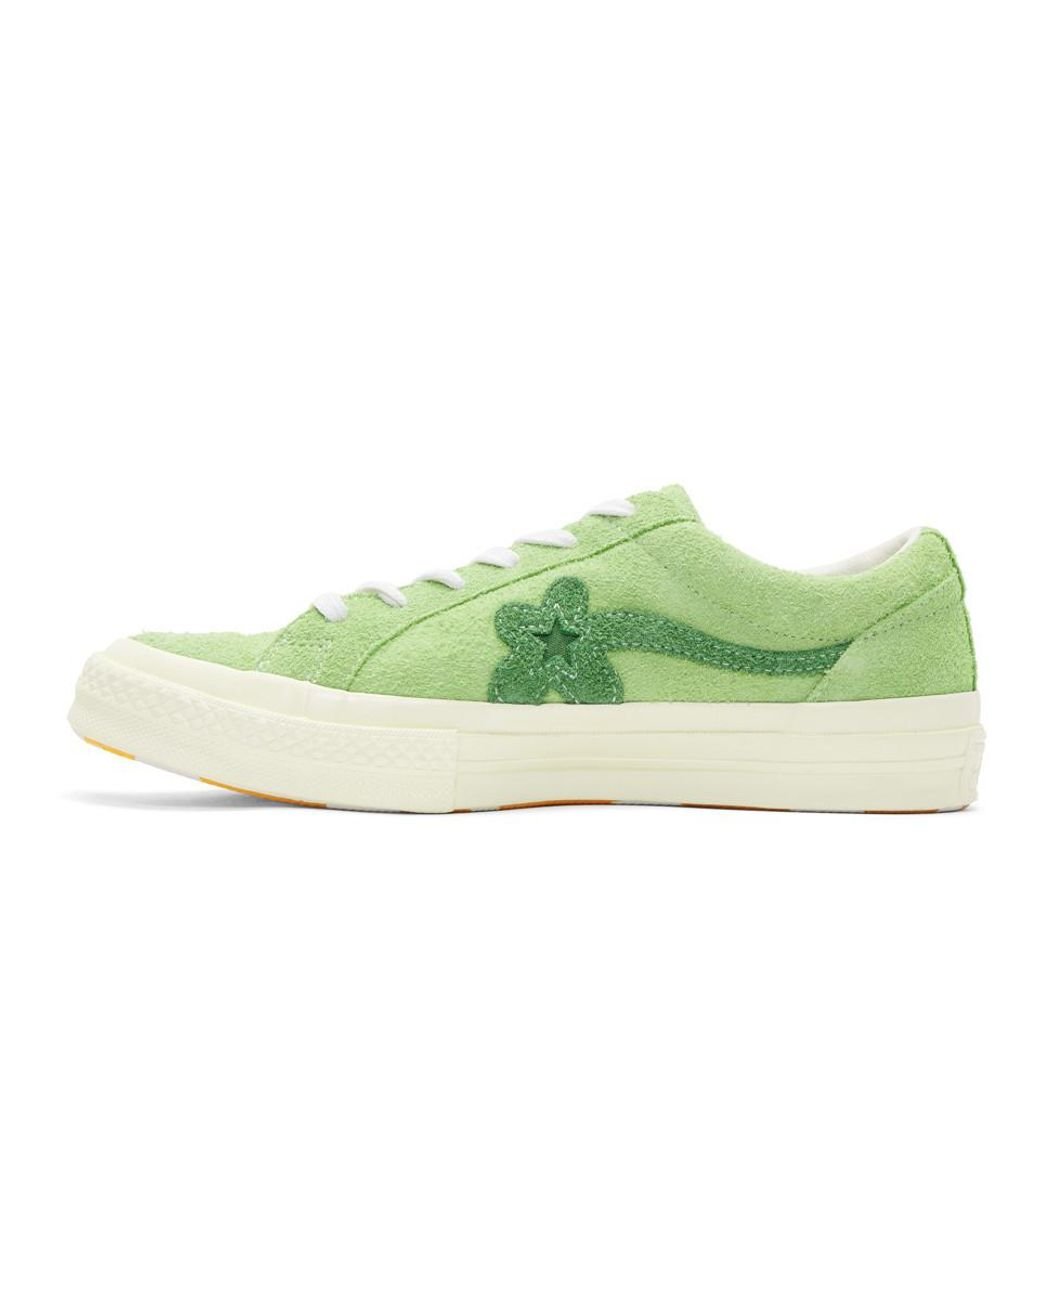 Converse Suede Green Golf Le Fleur Edition One Star Sneakers | Lyst